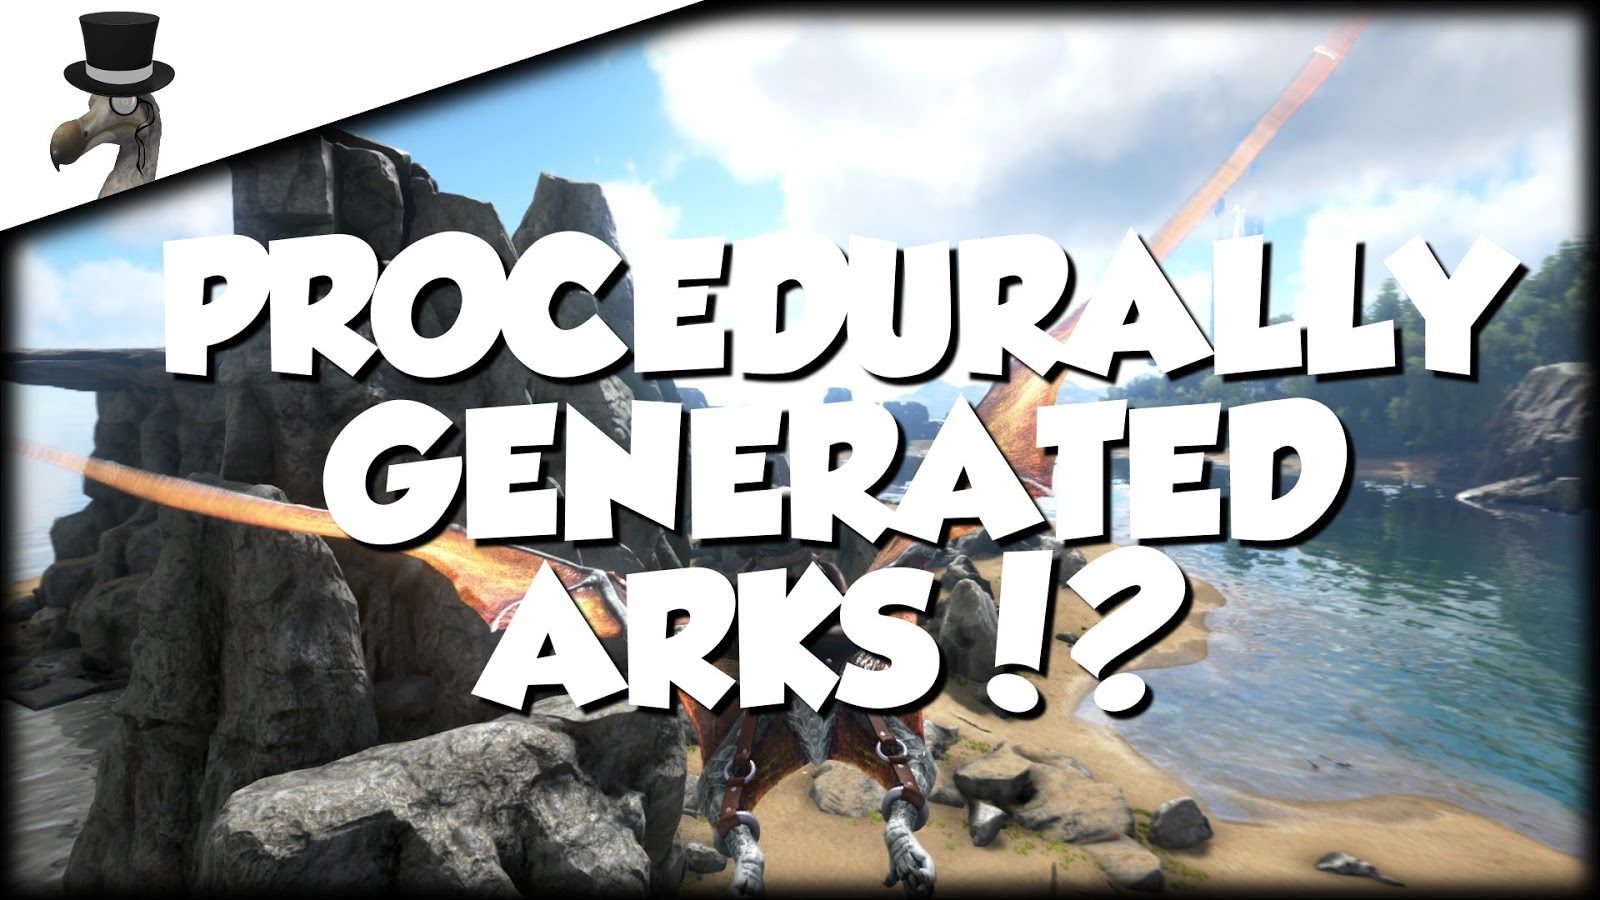 How to Create Your Very Own Procedurally Generated ARK/Map in Ark Survival: Evolved | Yhan Game